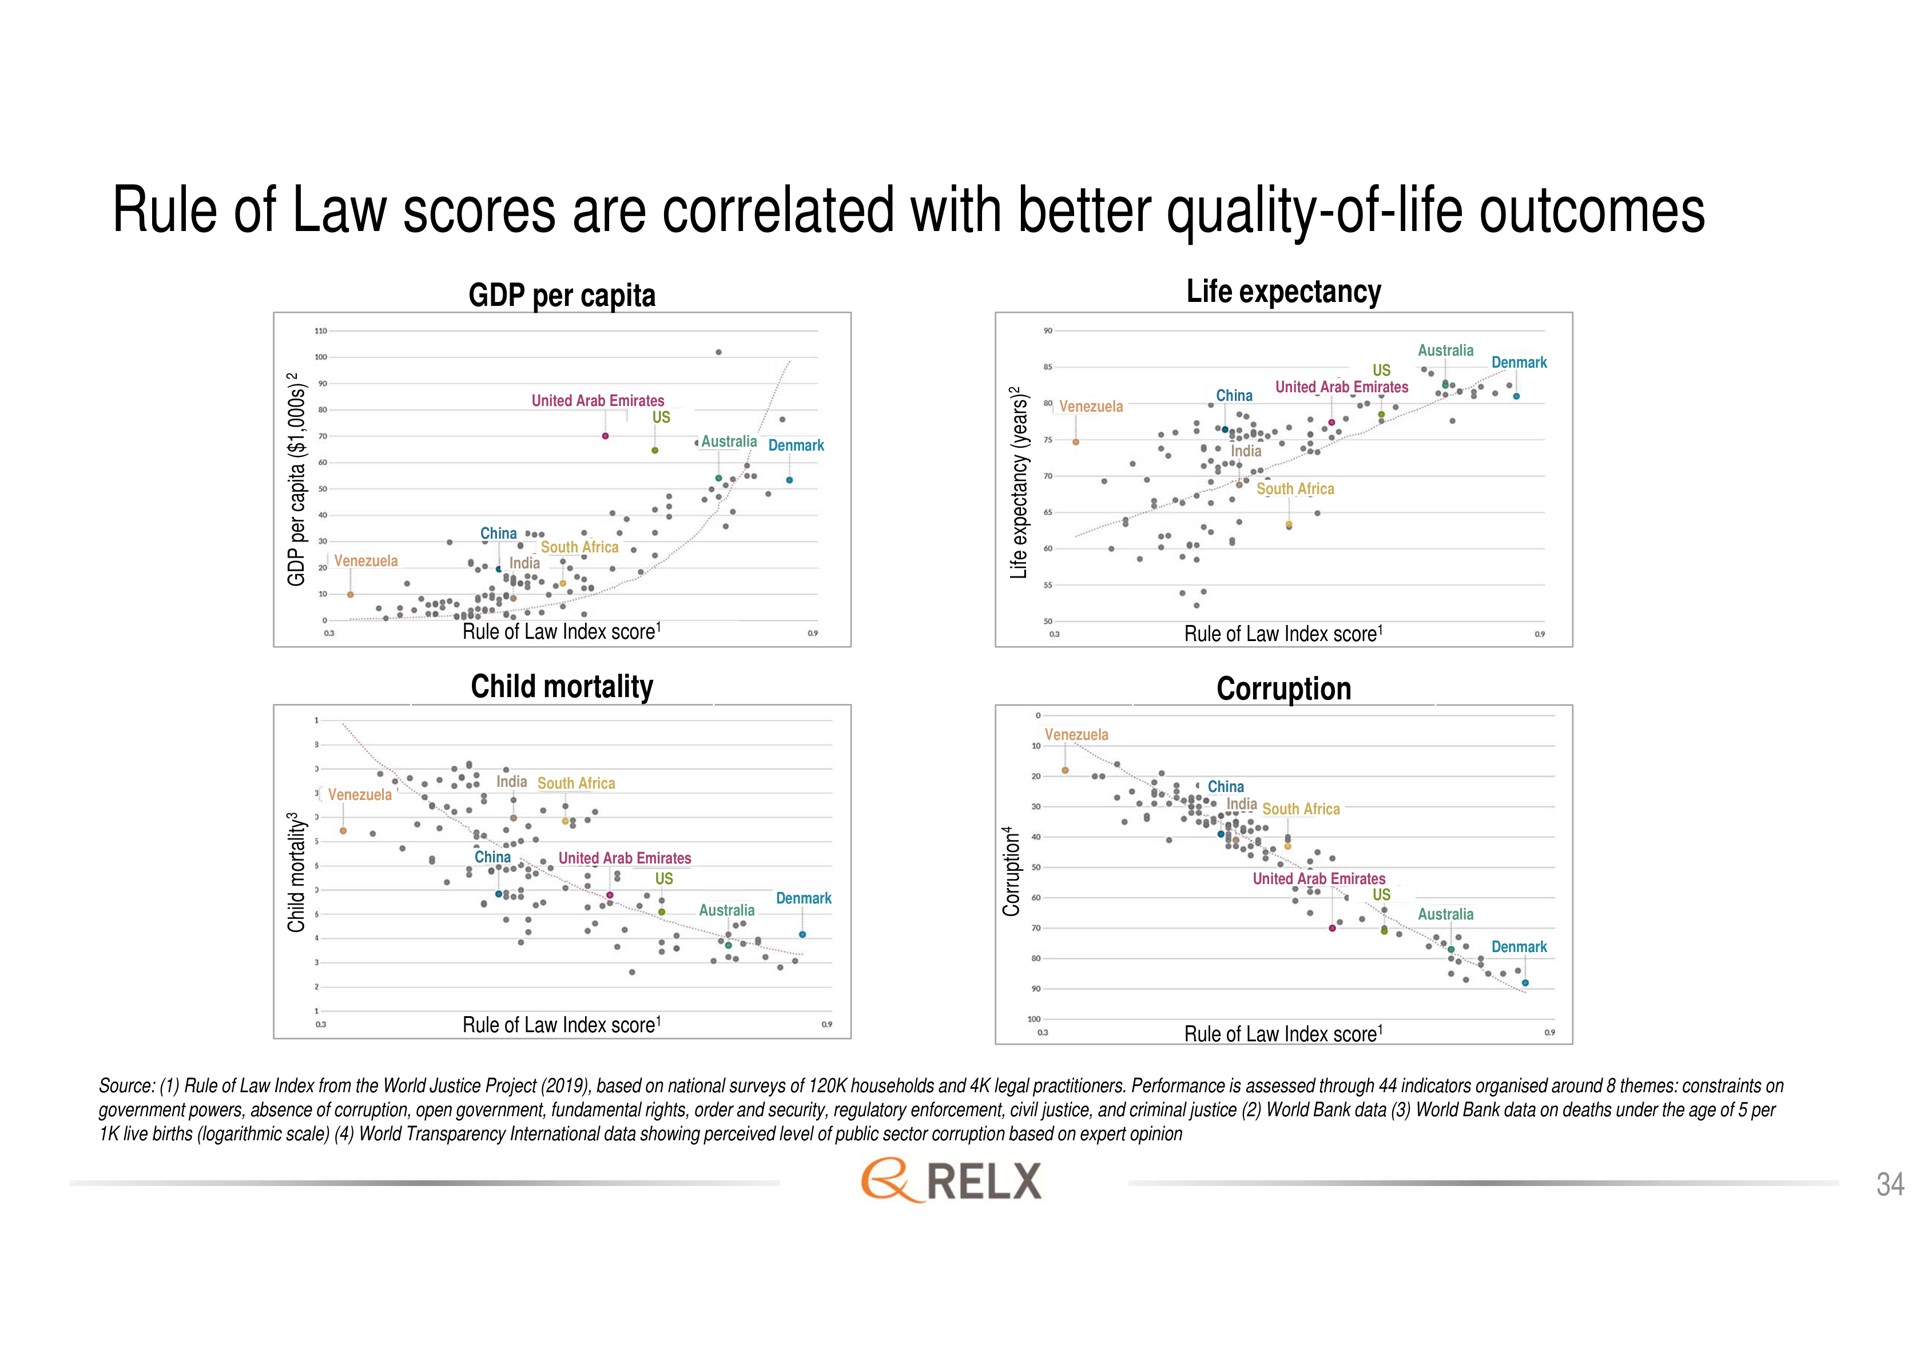 rule of law scores are correlated with better quality of life outcomes | RELX